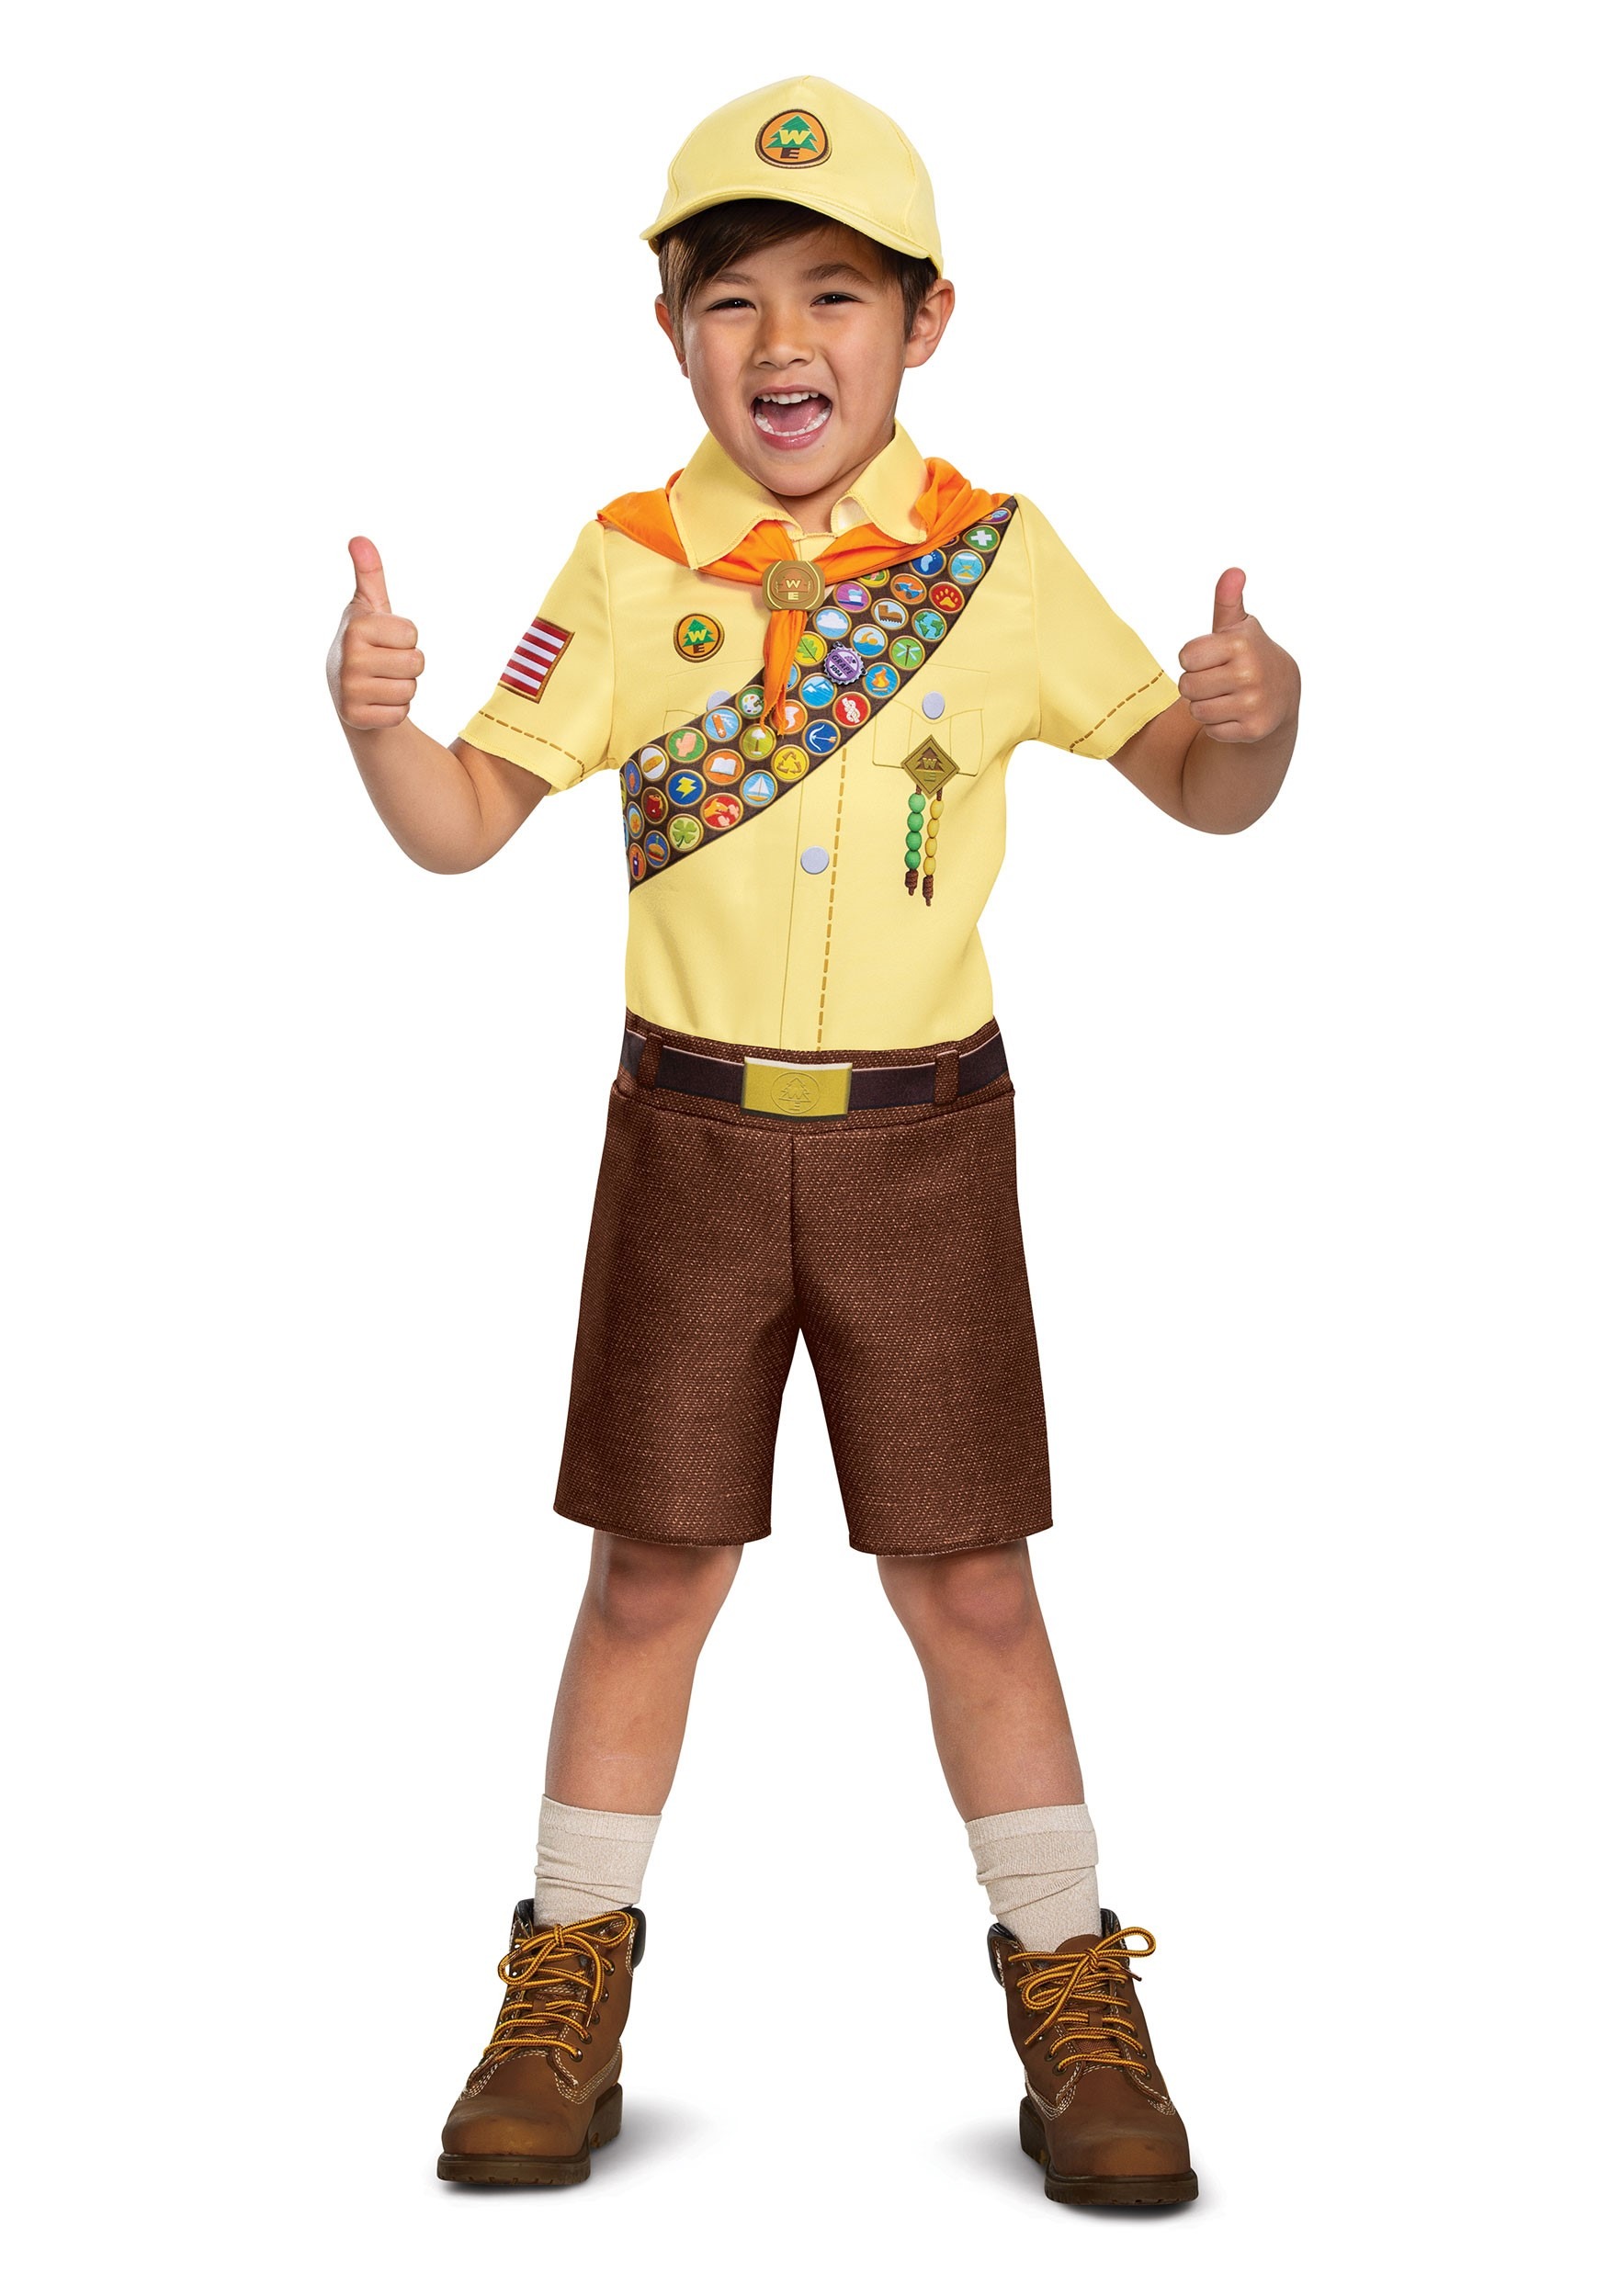 Photos - Fancy Dress UP3D Disguise UP Classic Russell Costume For Boys Yellow/Orange DI106959 